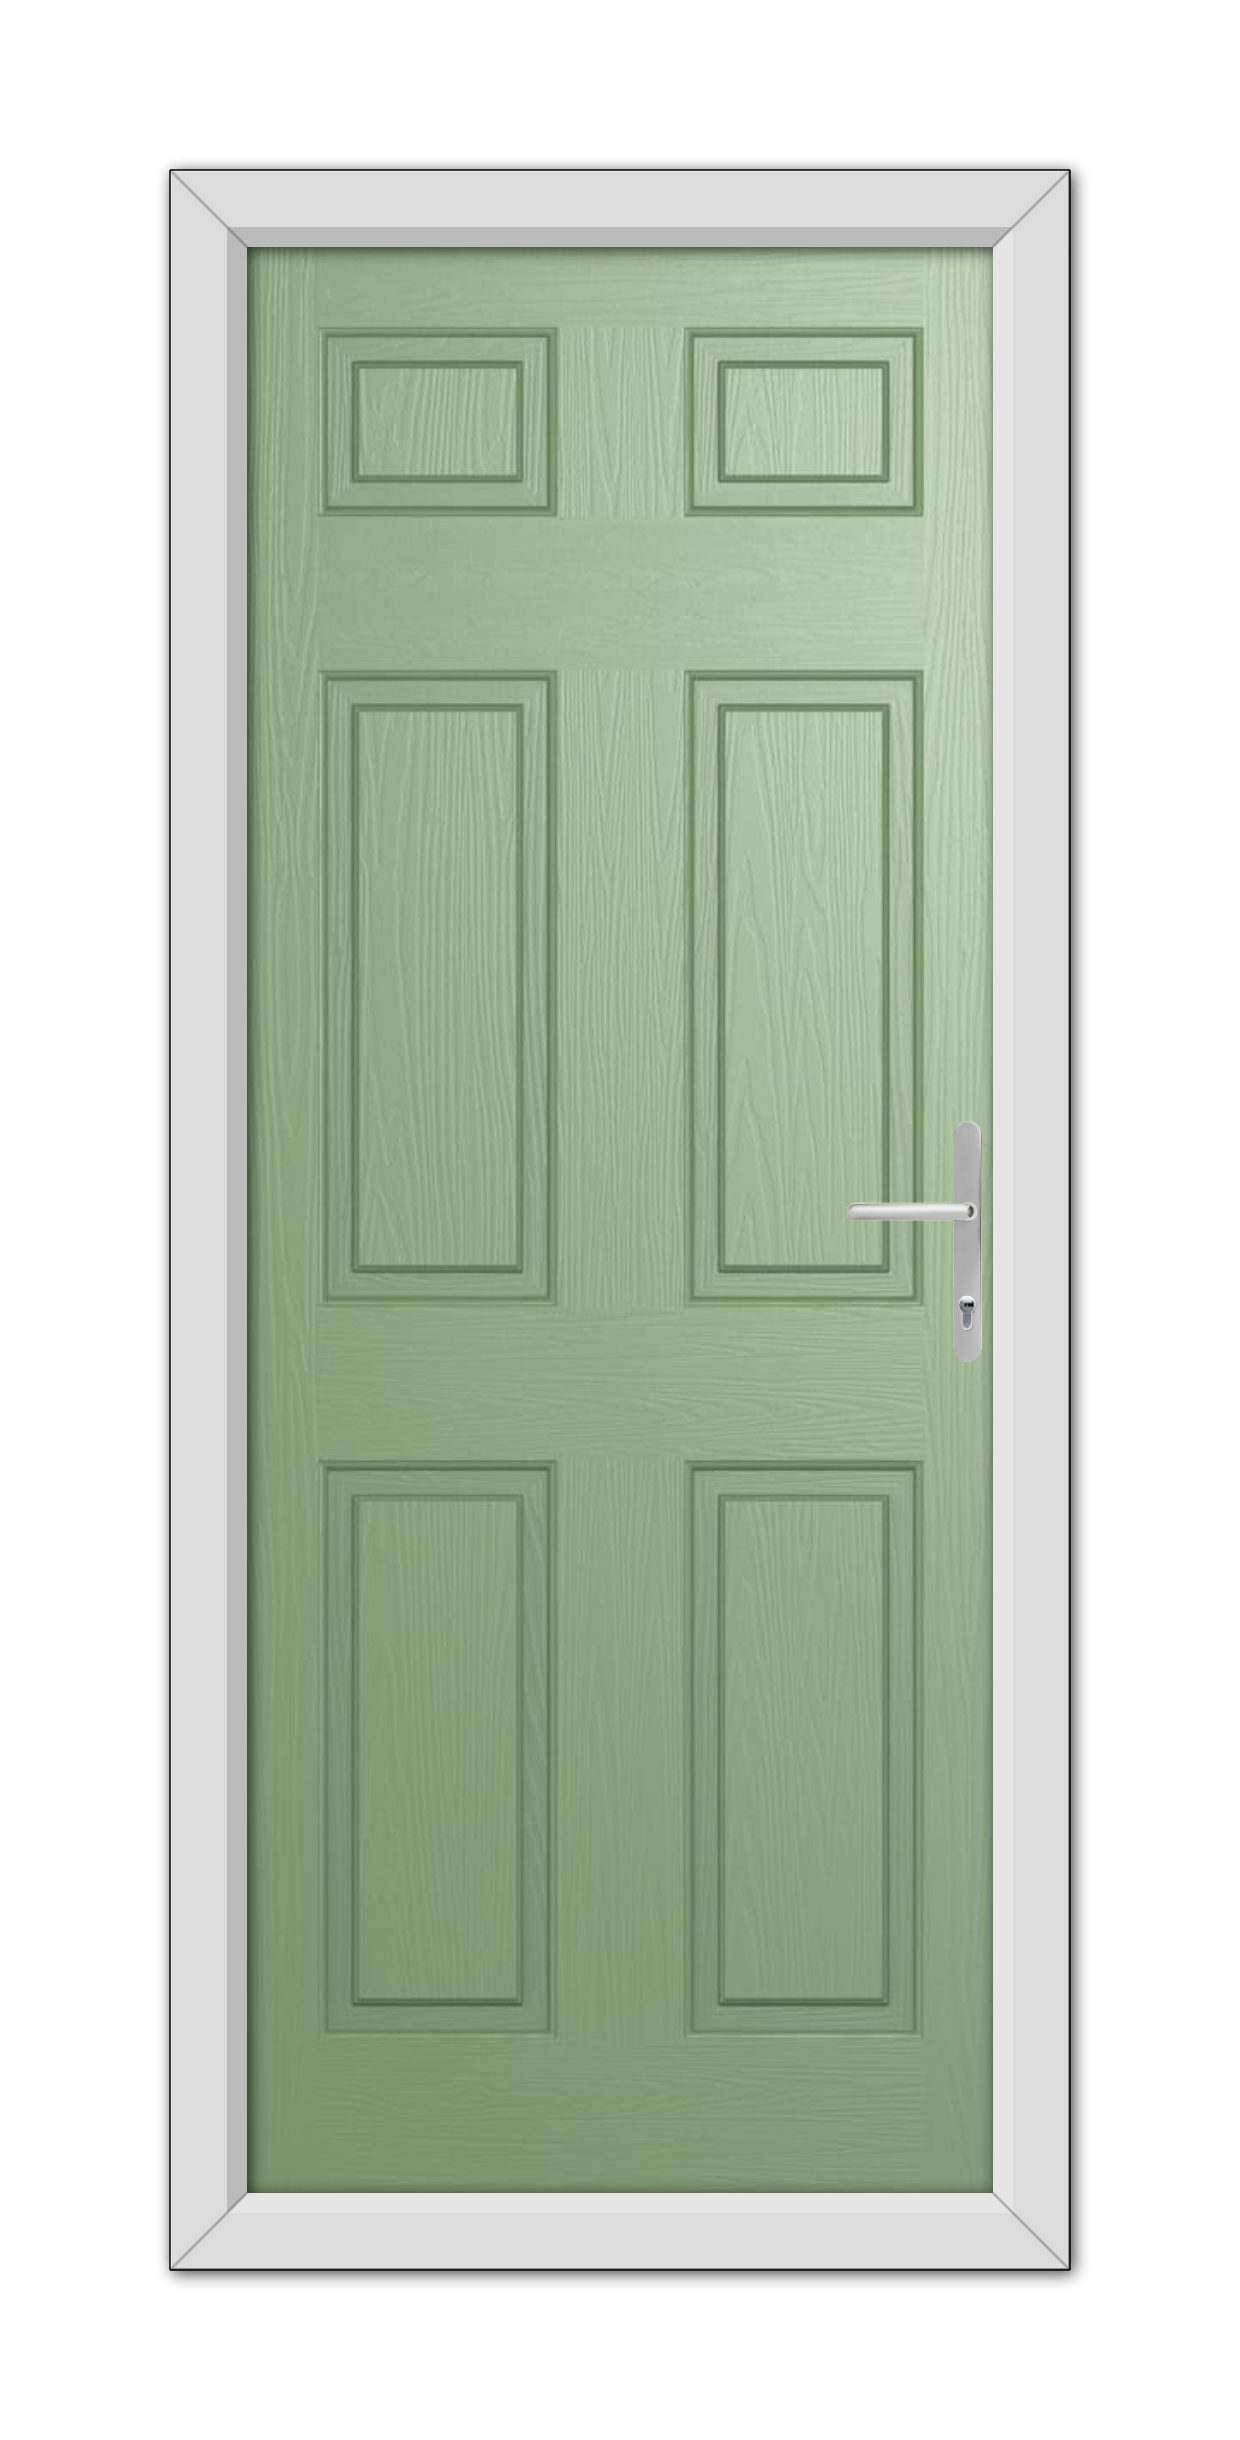 A Chartwell Green Middleton Solid Composite Door with six panels and a silver handle, set in a white frame.